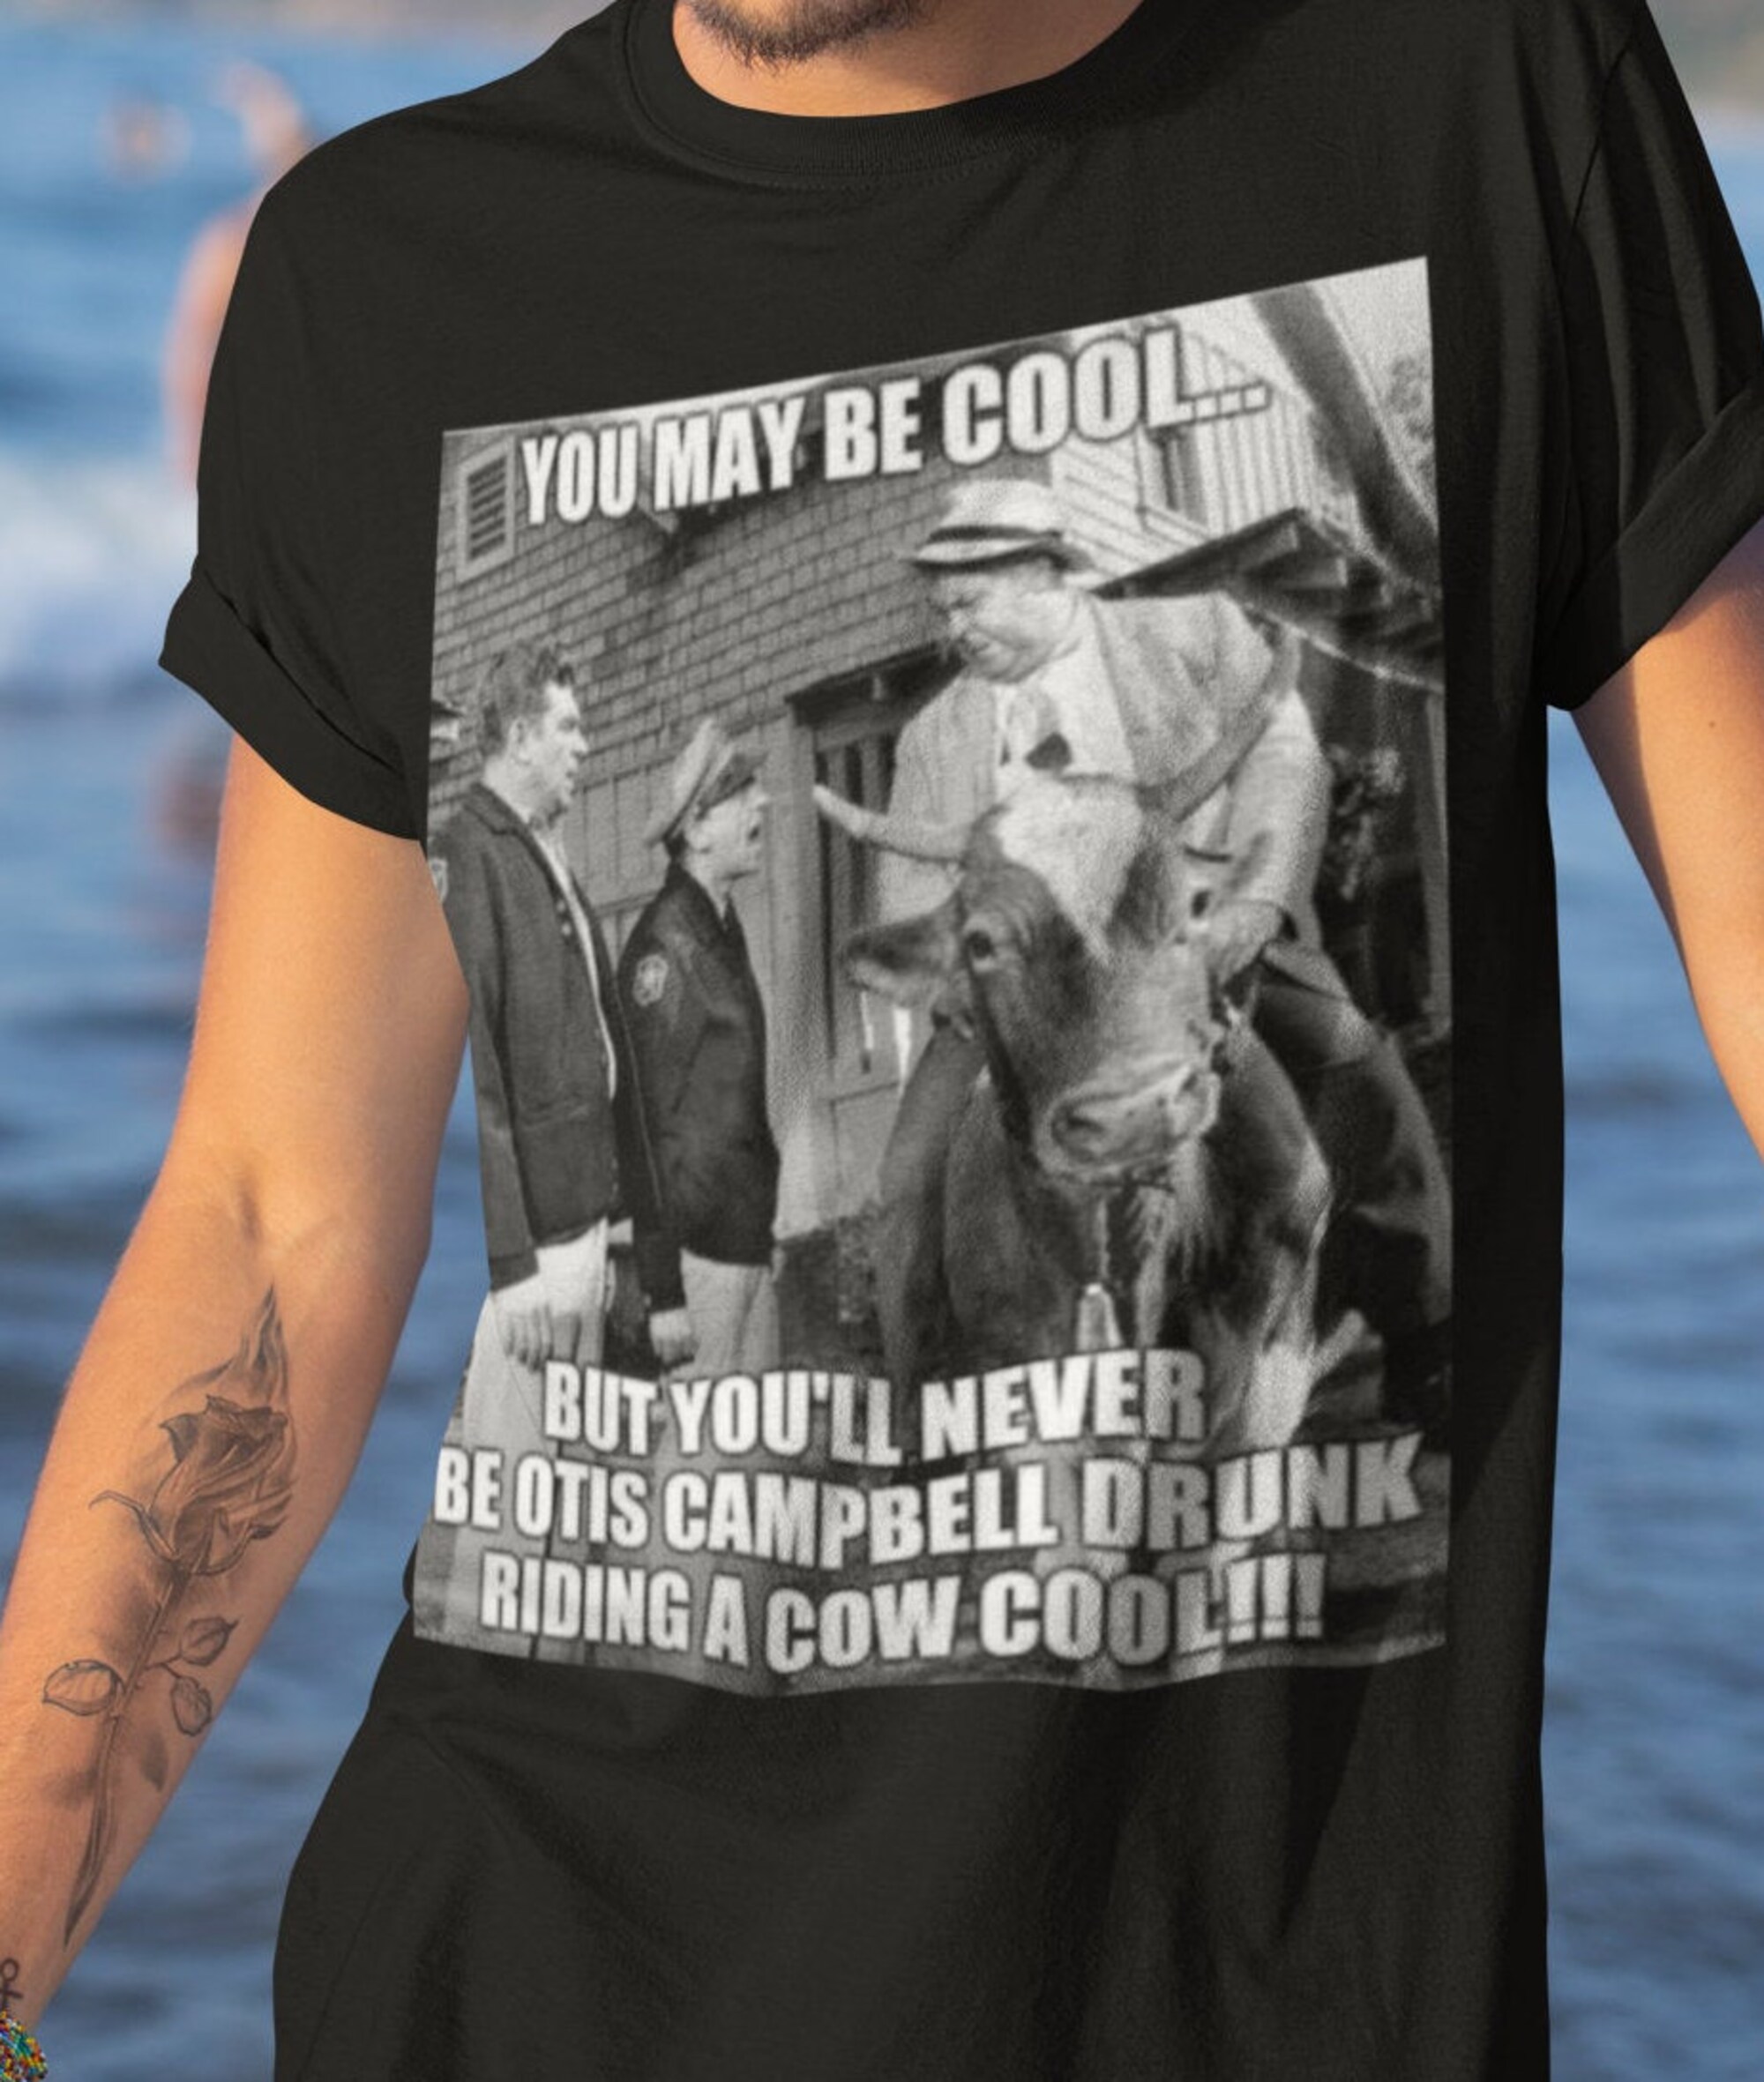 Andy Griffith show Shirt Otis the Drunk Shirt You may be cool shirt